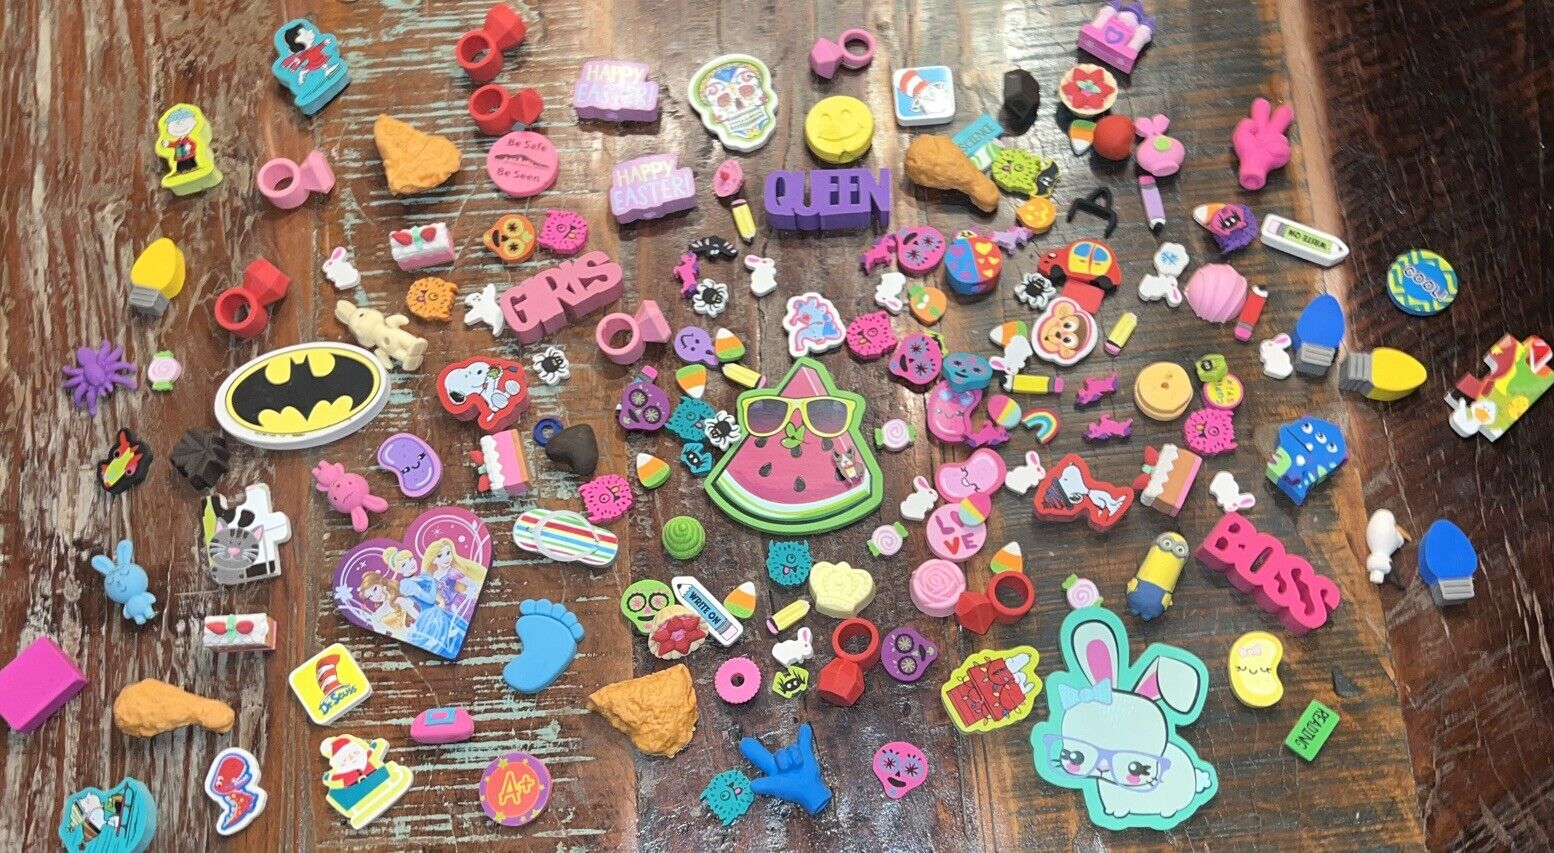 Lot of 100+ Novelty Shaped Erasers Almost 4lbs. Teachers Prize Box